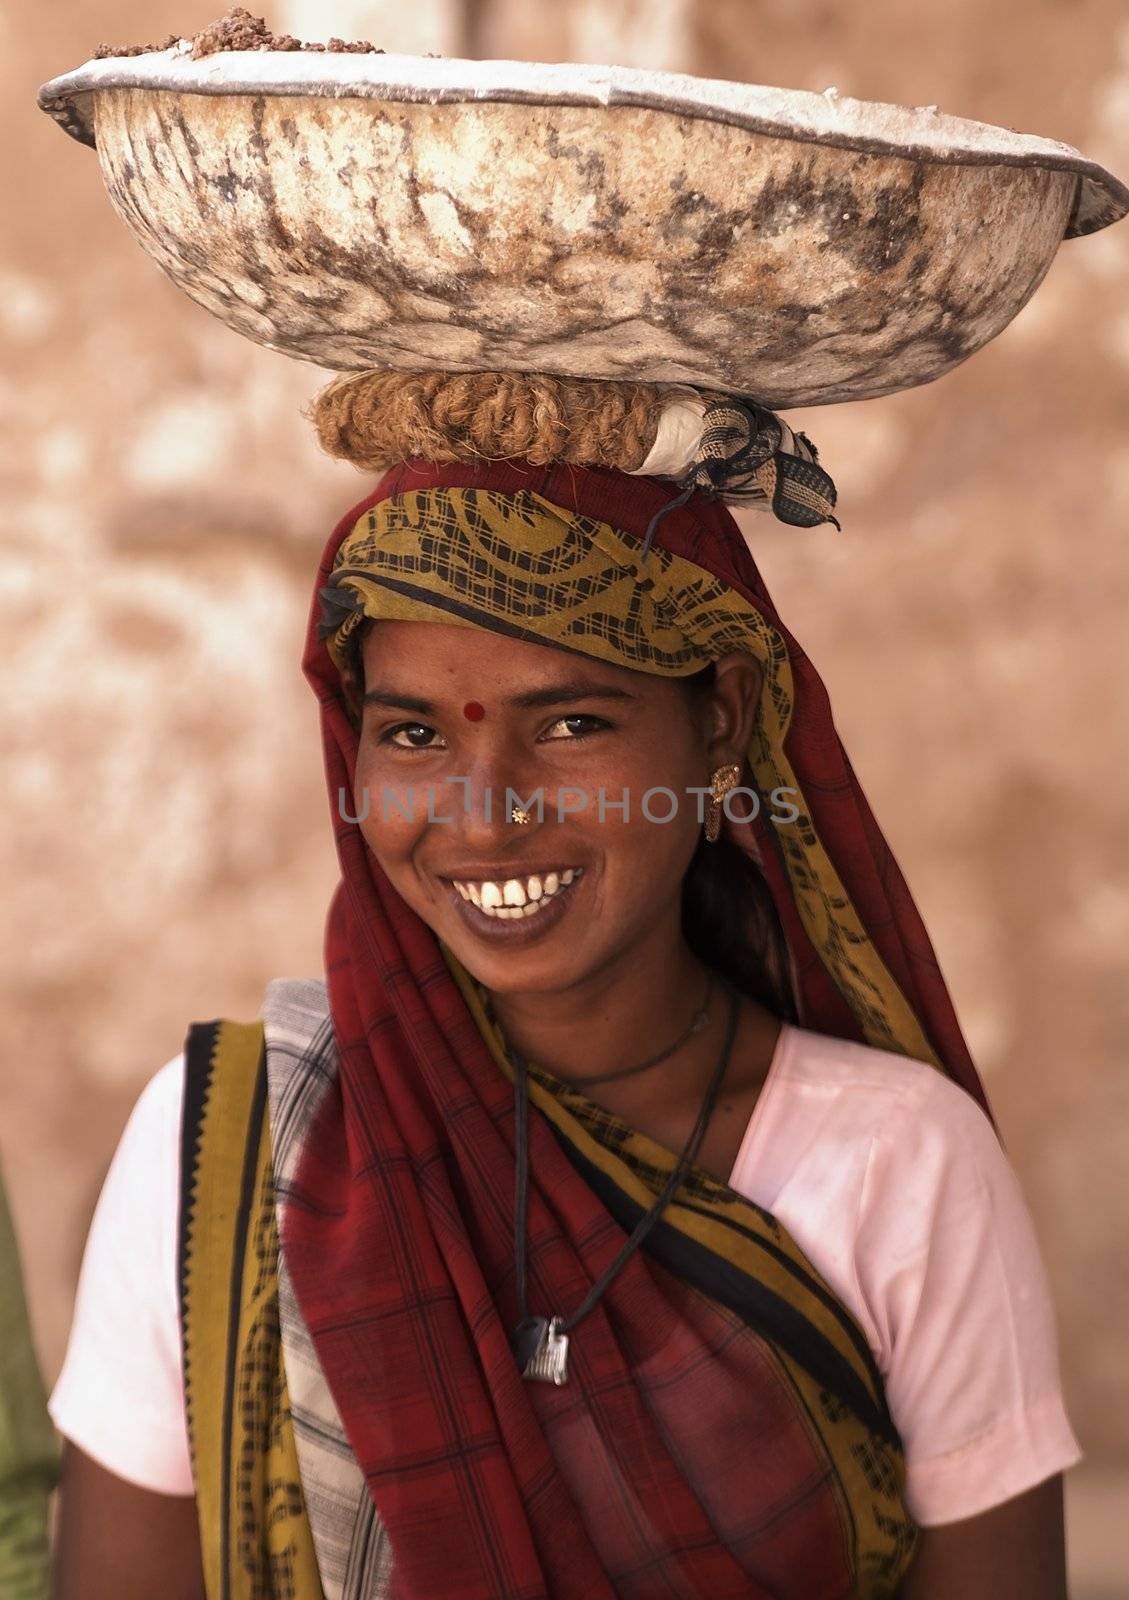 Indian woman labourer carrying metal bowl filled with cement